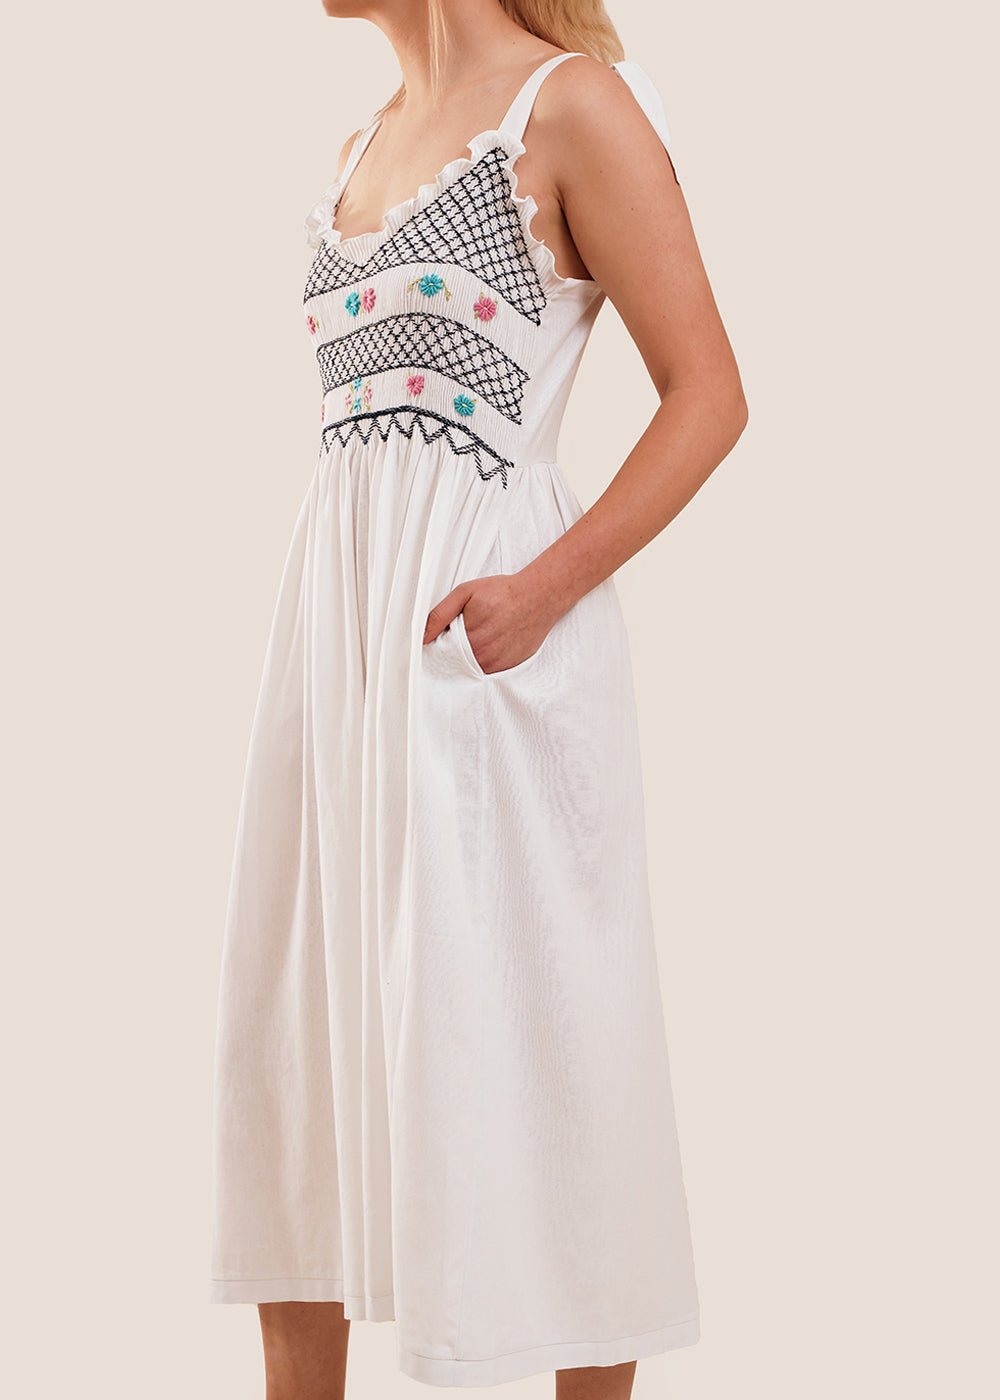 Tach Ami Linen Dress - New Classics Studios Sustainable Ethical Fashion Canada